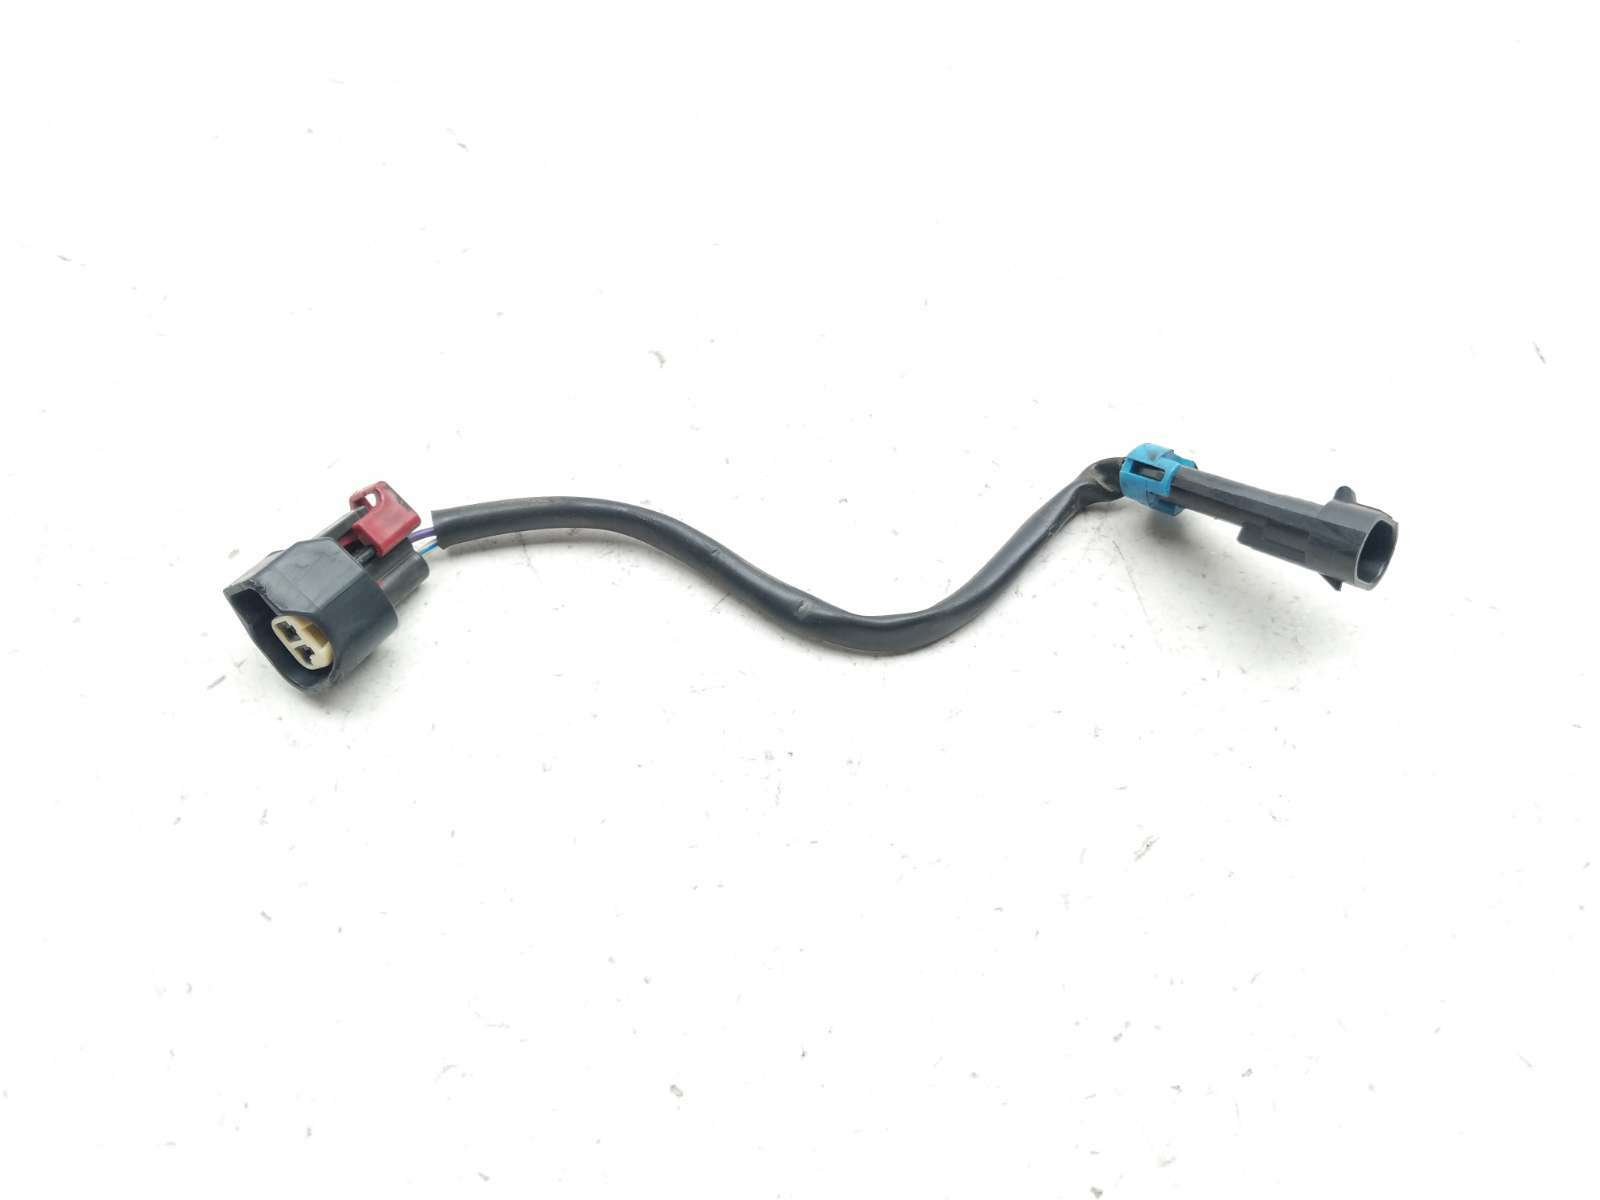 03 Victory V92 V92C Injector Wire Harness TRSH DW